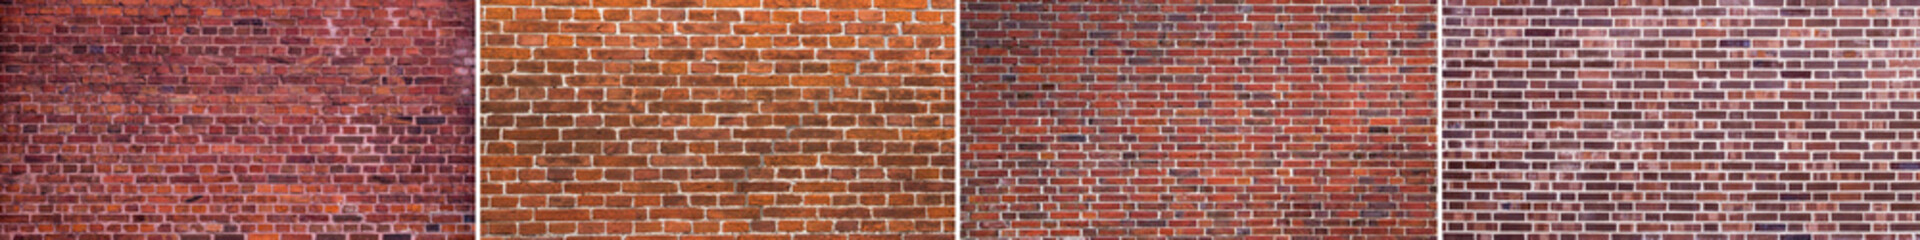 old red brick wall background - texture of brickwall	
